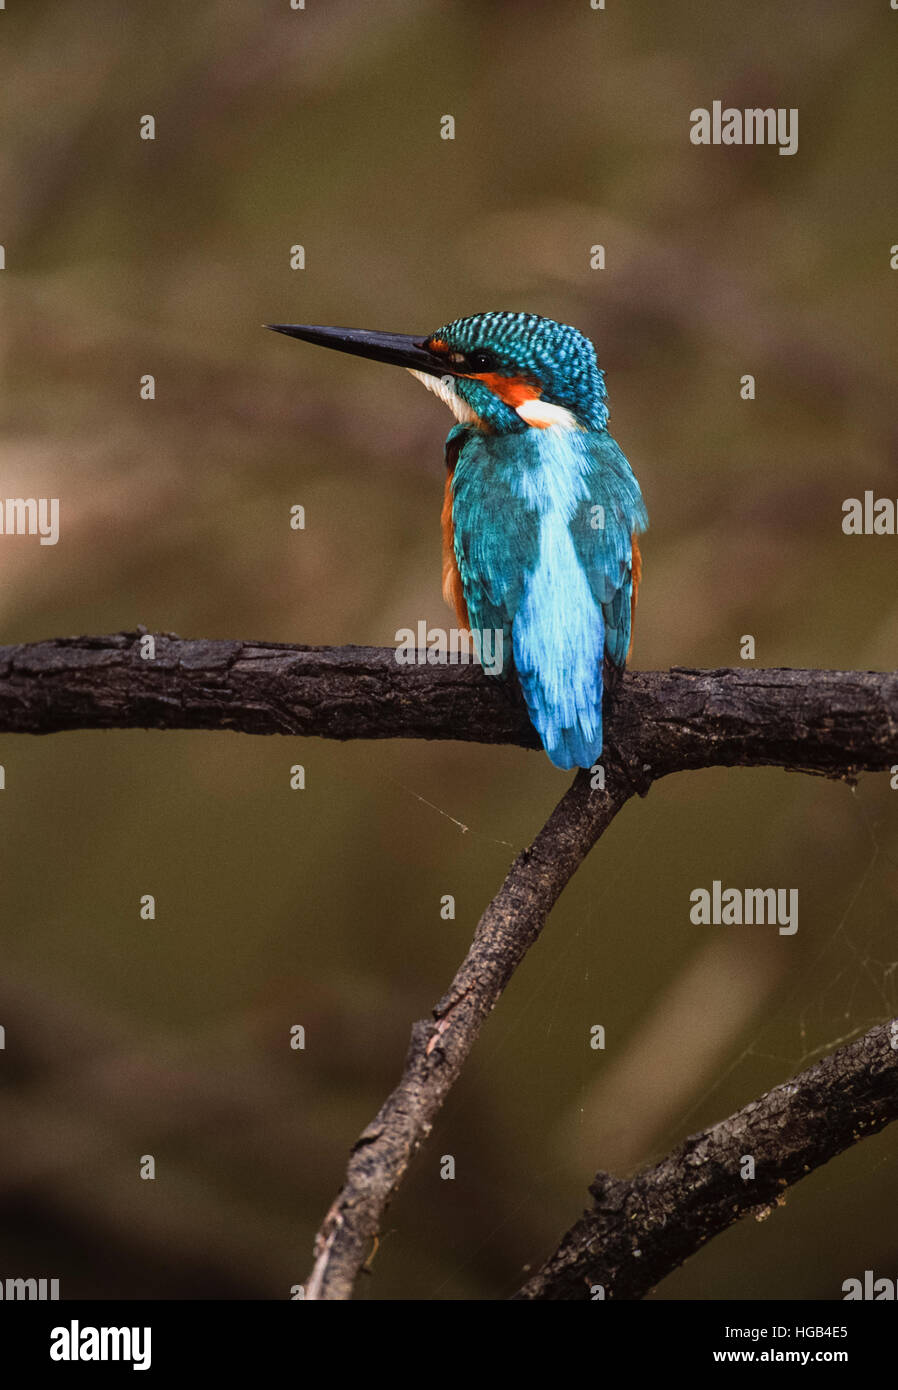 Common Kingfisher or Eurasian Kingfisher, (Alcedo atthis), perched on branch,Hertforshire,England,United Kingdom Stock Photo